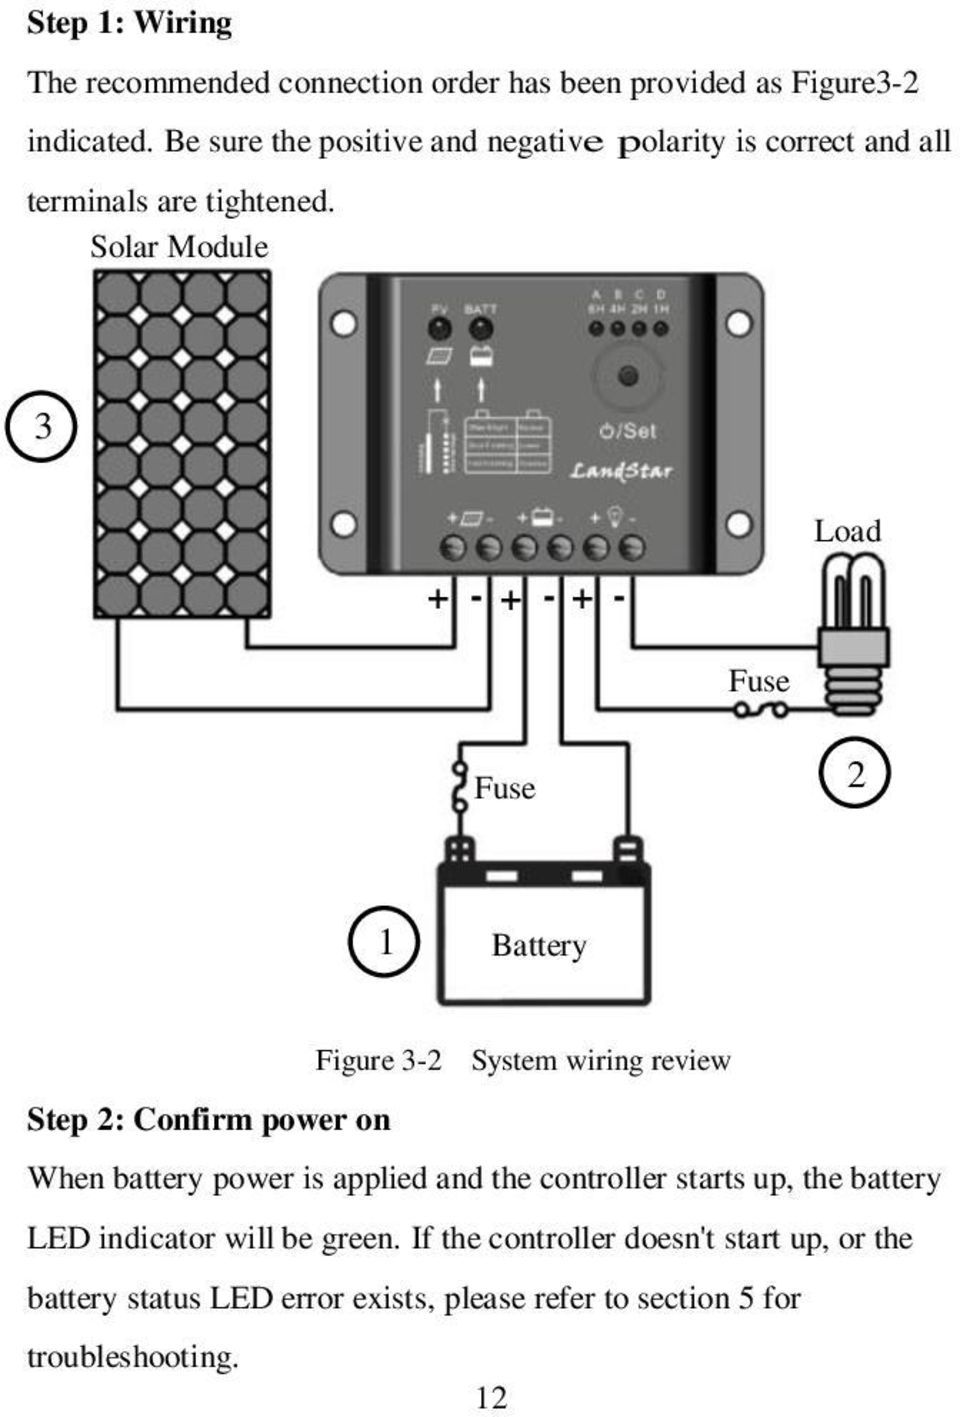 Solar Module 3 1 + - + - + - Load Fuse Fuse 2 1 1 1 Battery Figure 3-2 System wiring review Step 2: Confirm power on When battery